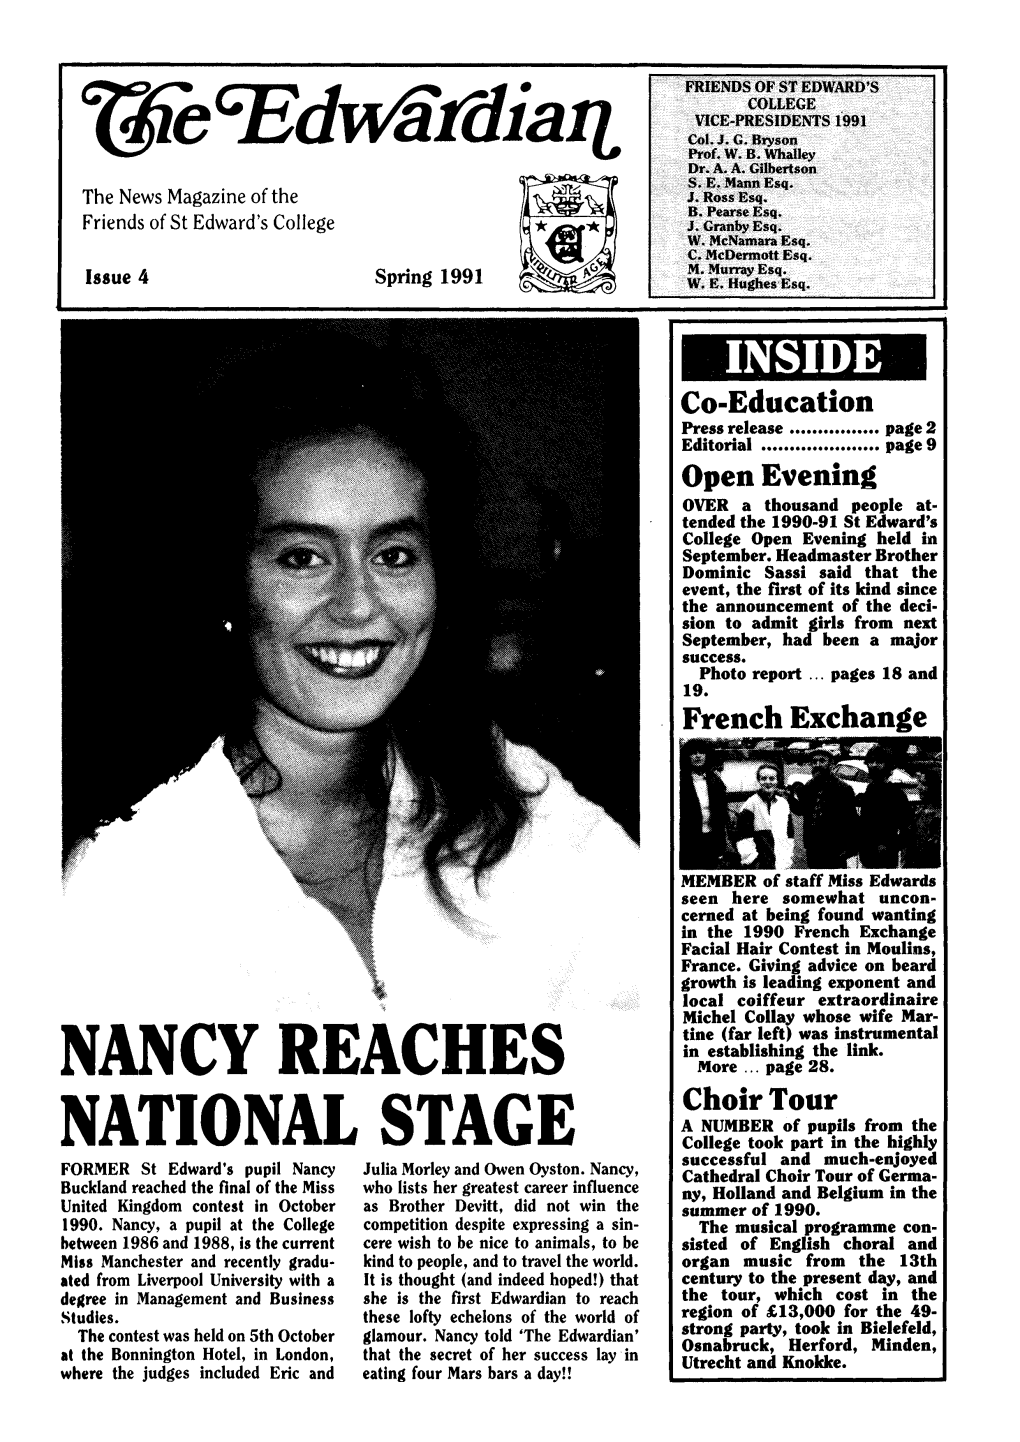 Nancy Reaches National Stage